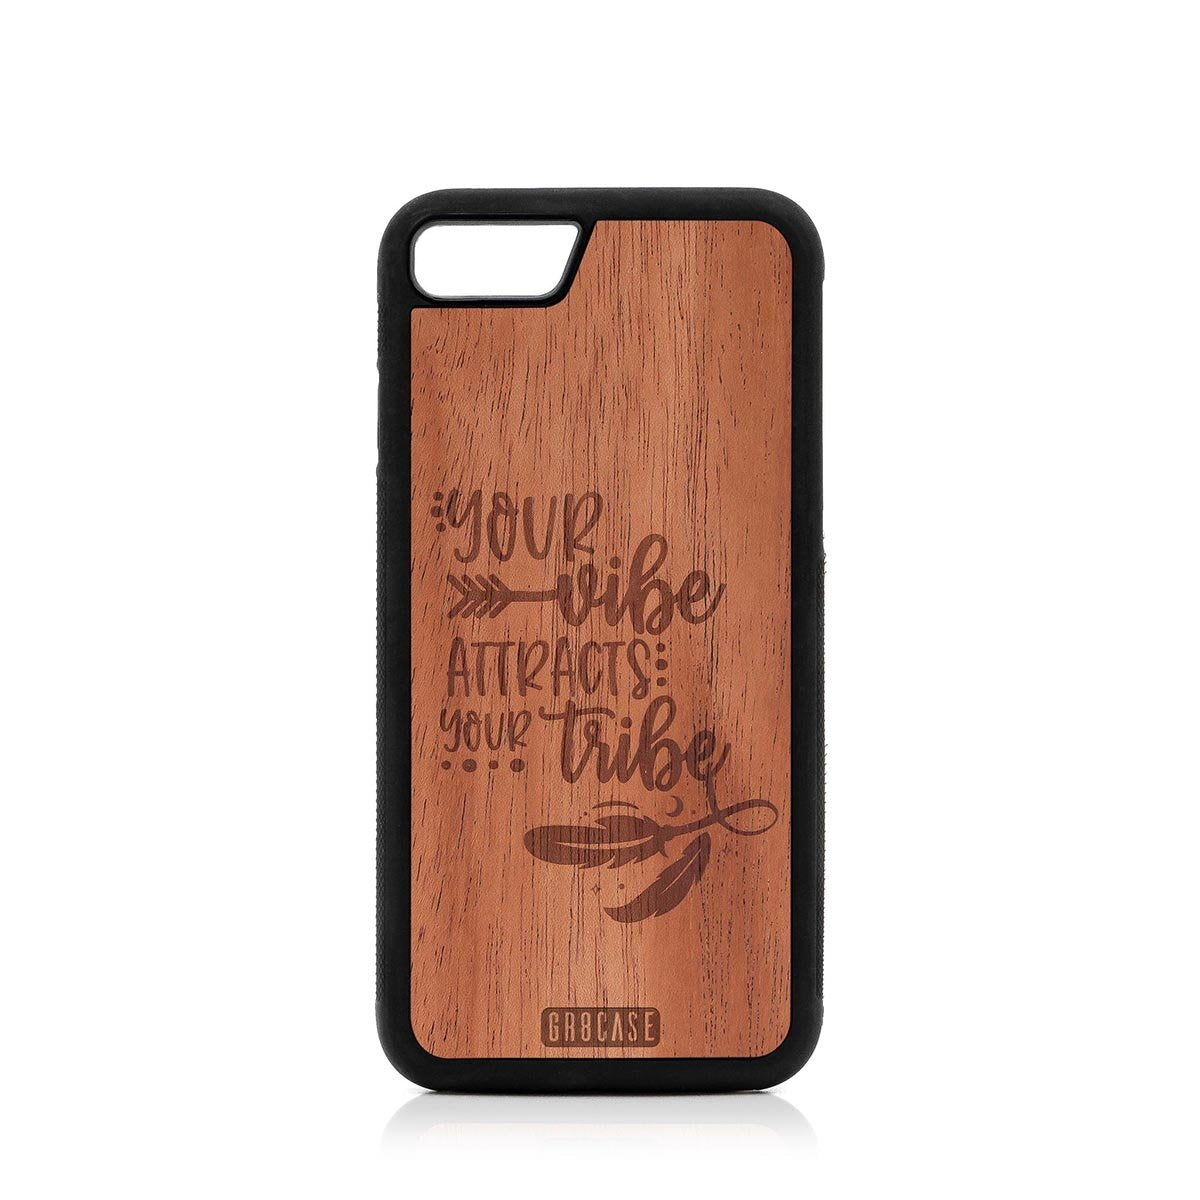 Your Vibe Attracts Your Tribe Design Wood Case For iPhone SE 2020